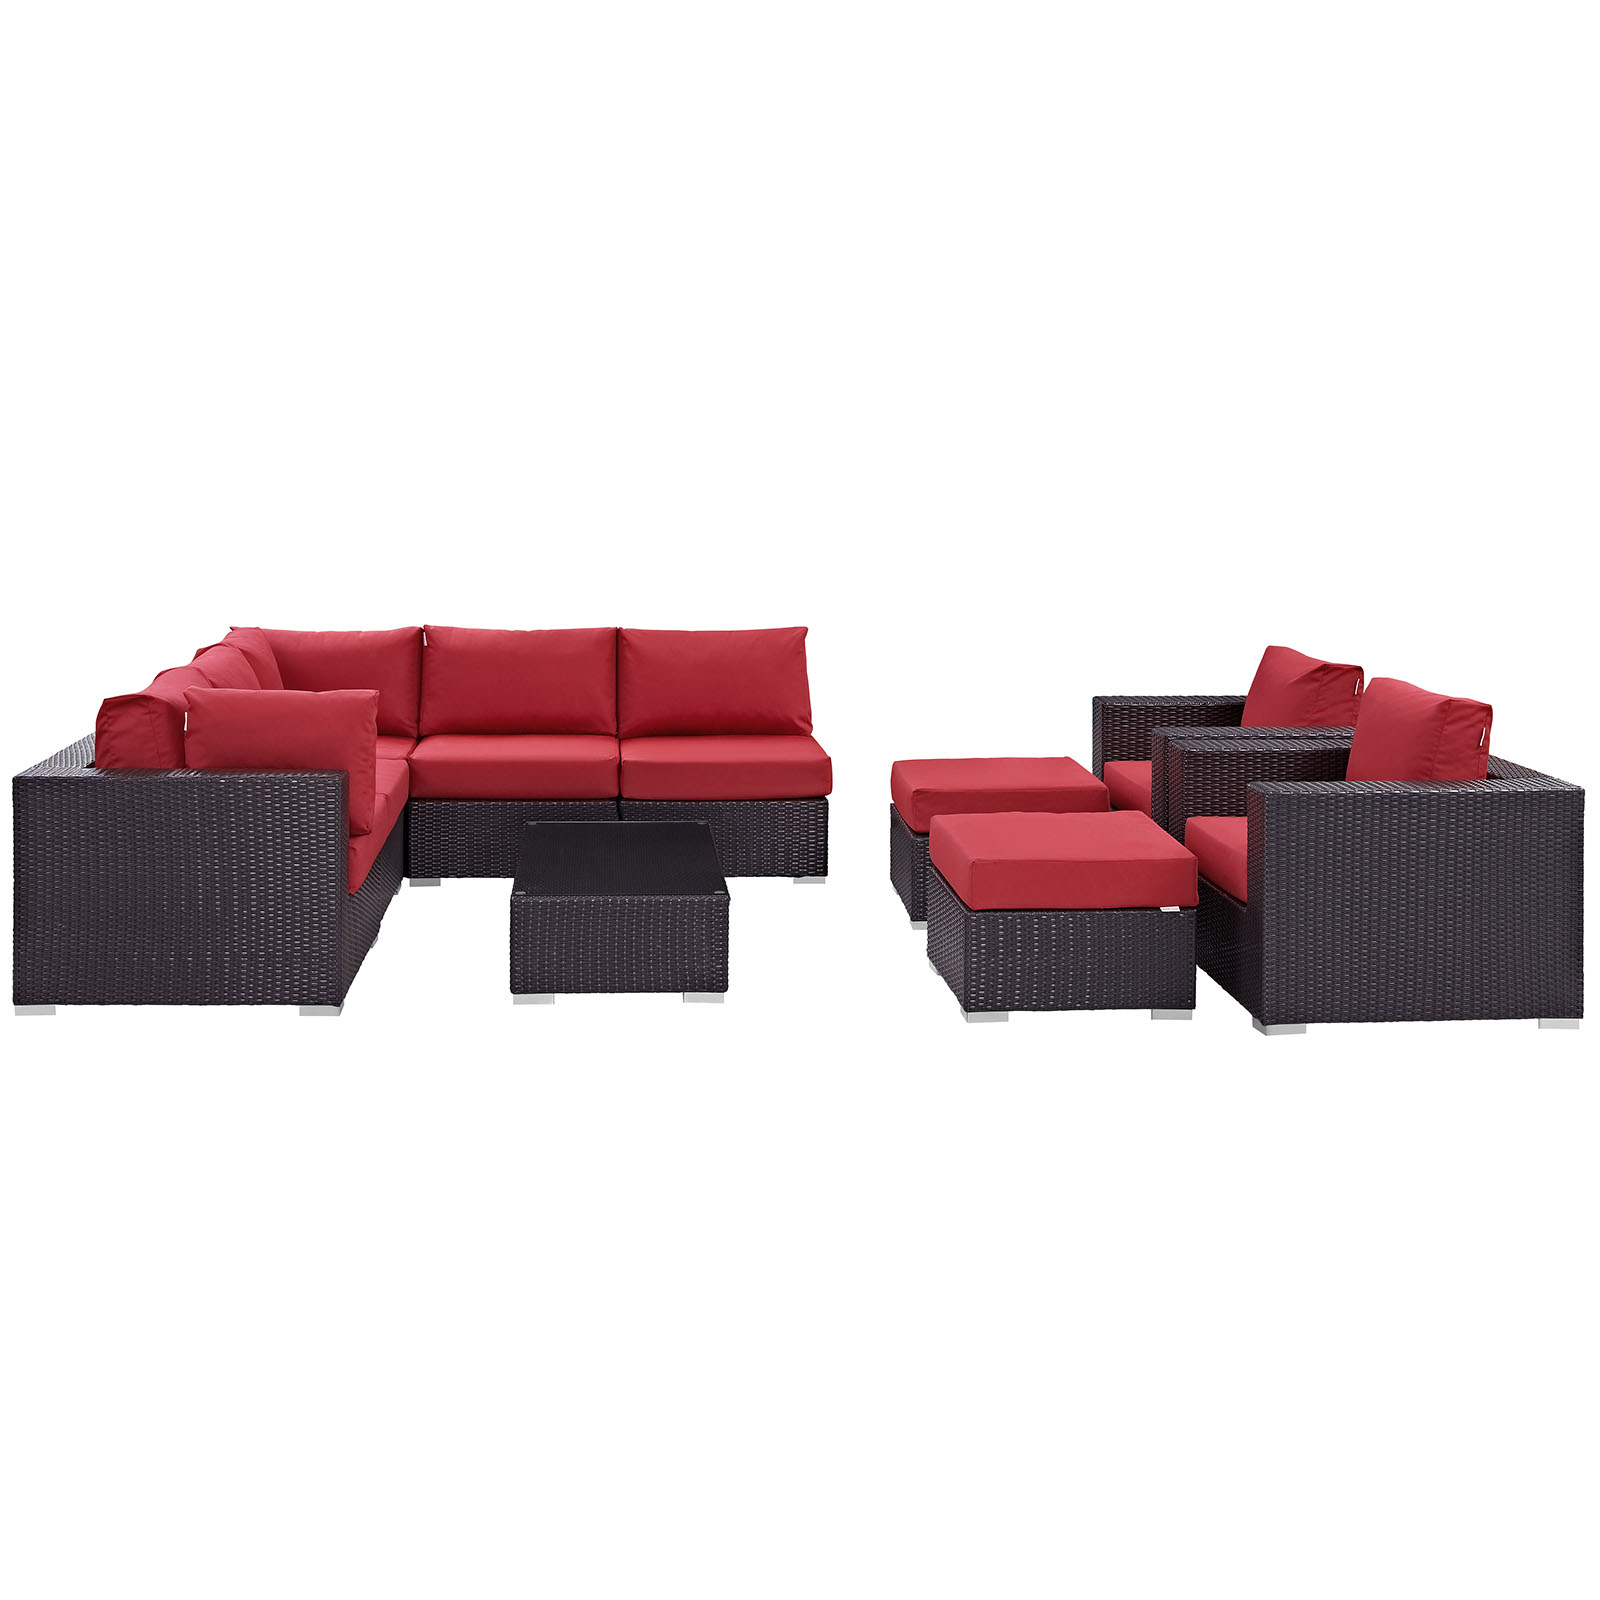 Modway Convene 10 Piece Outdoor Patio Sectional Set in Espresso Red - image 4 of 9